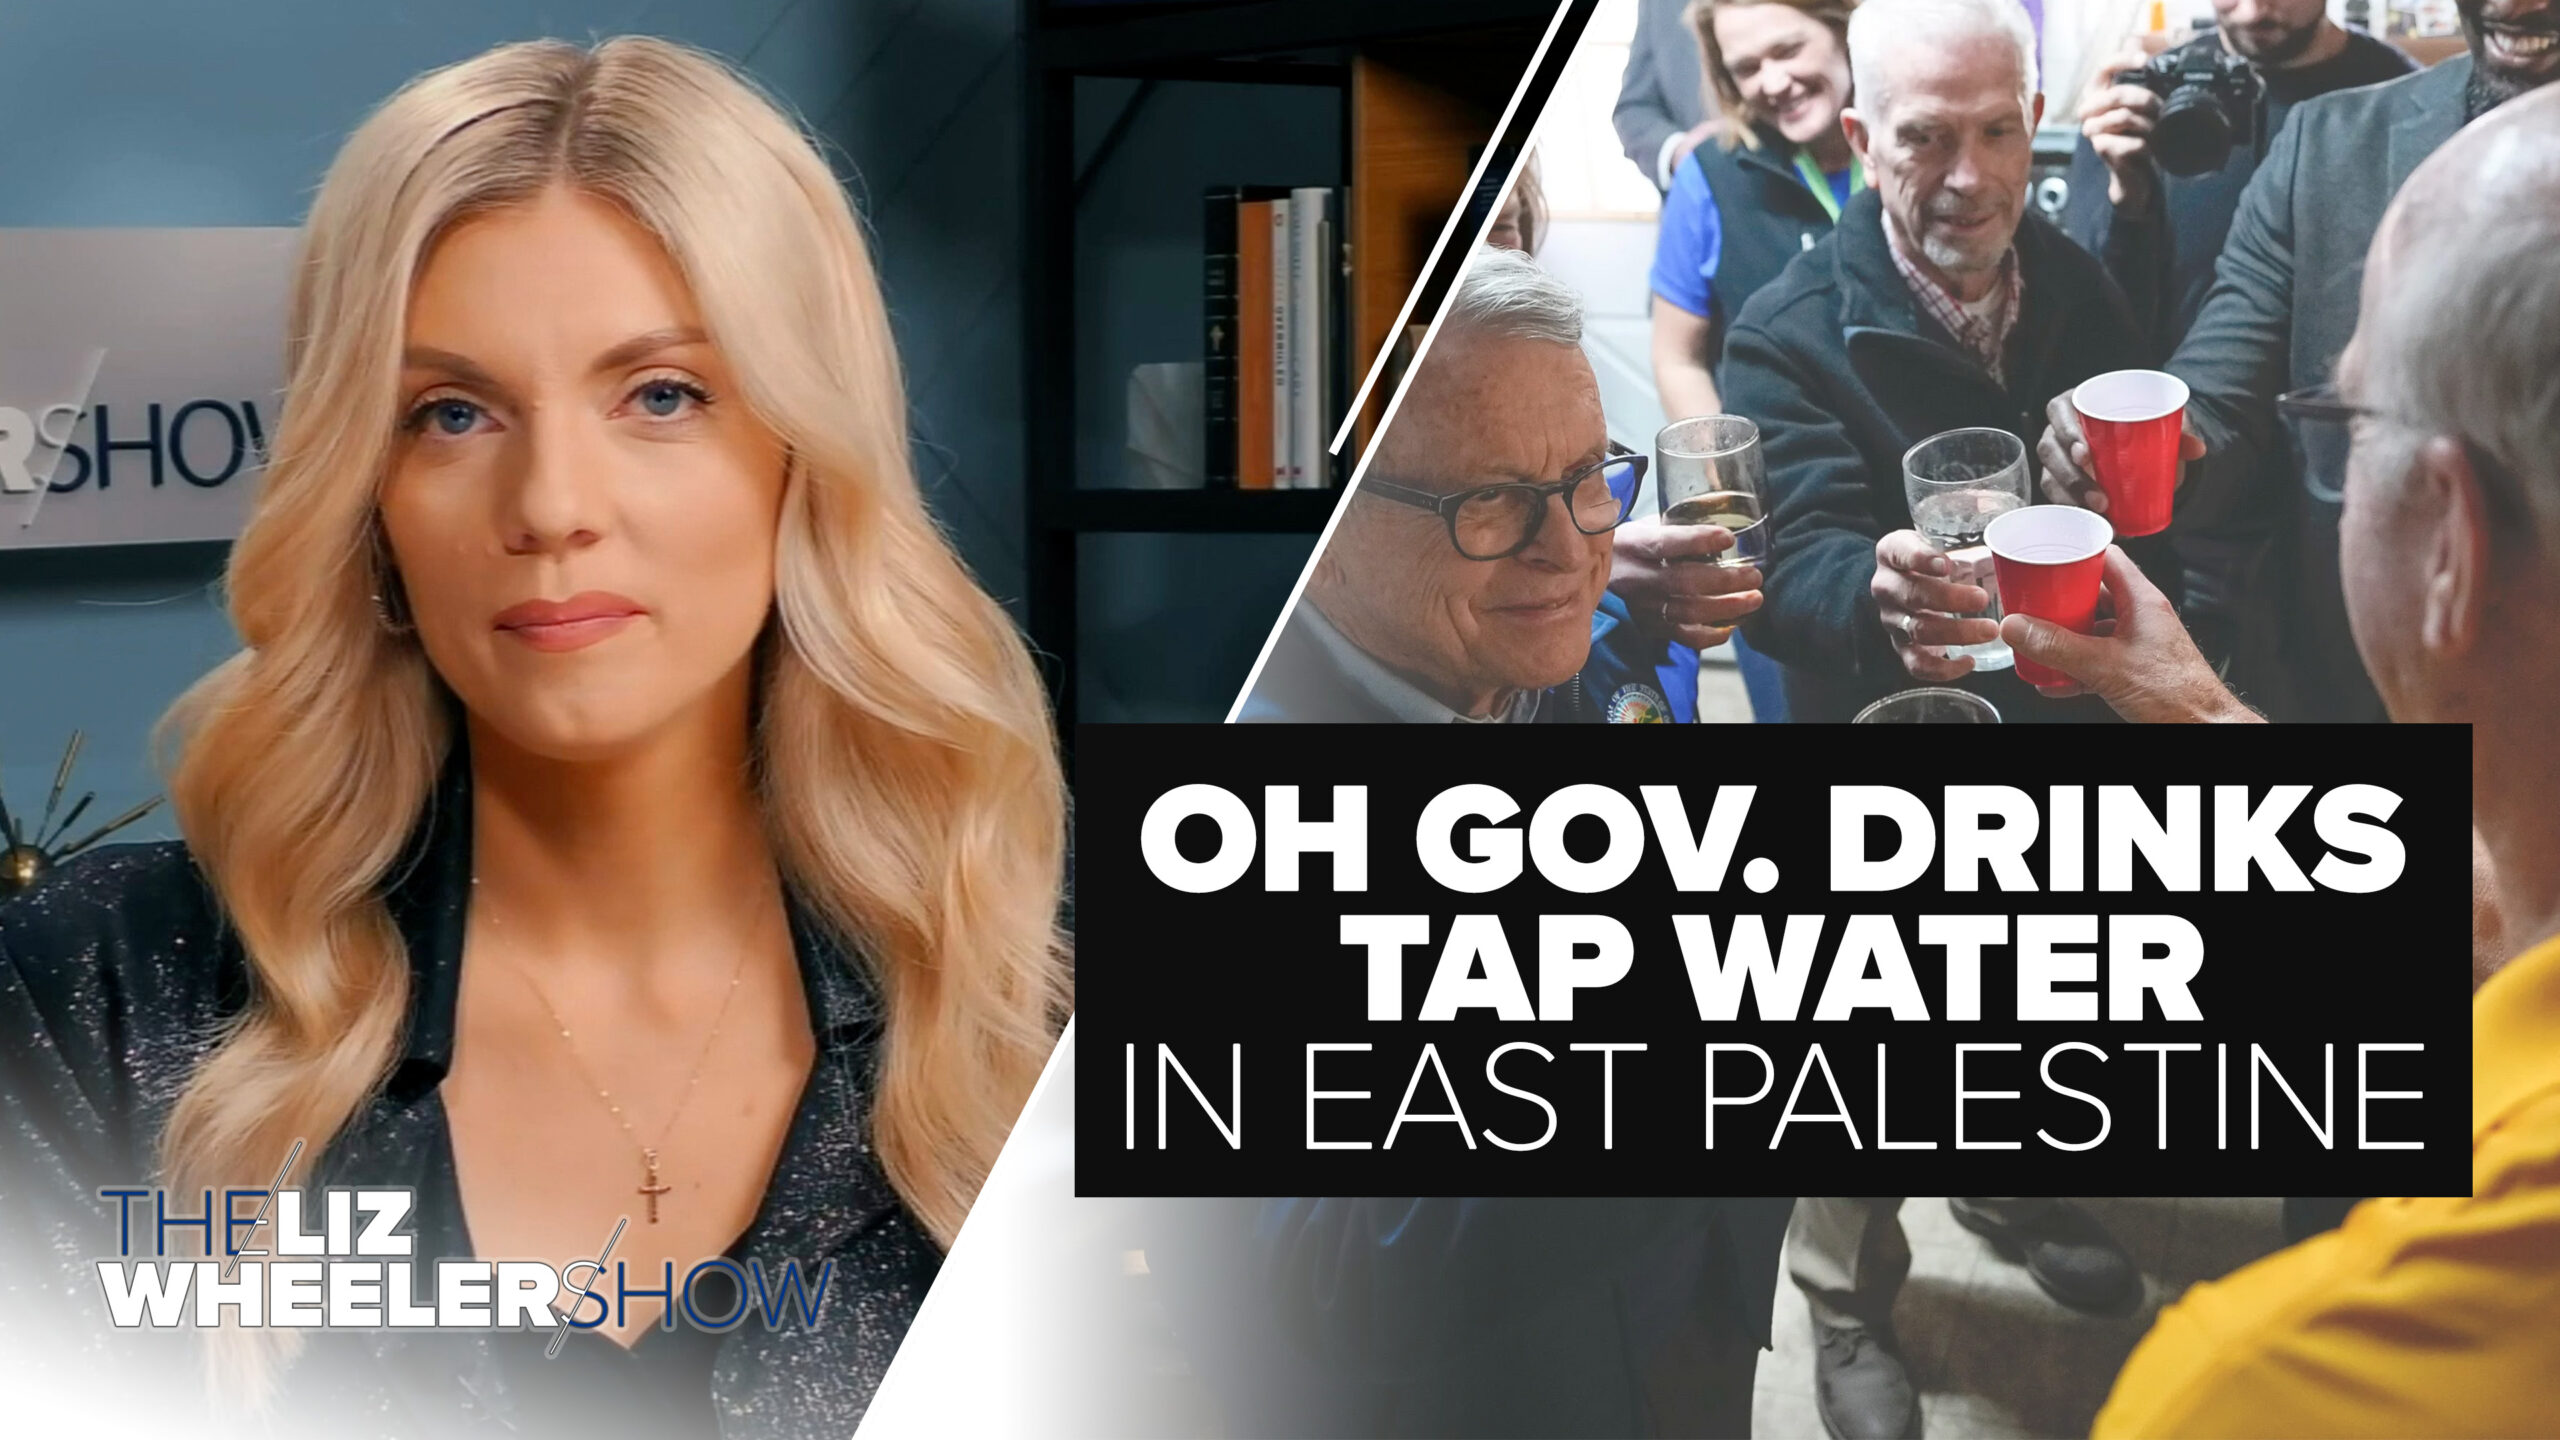 Ohio Governor Mike DeWine holds up a glass of tap water with East Palestine residents